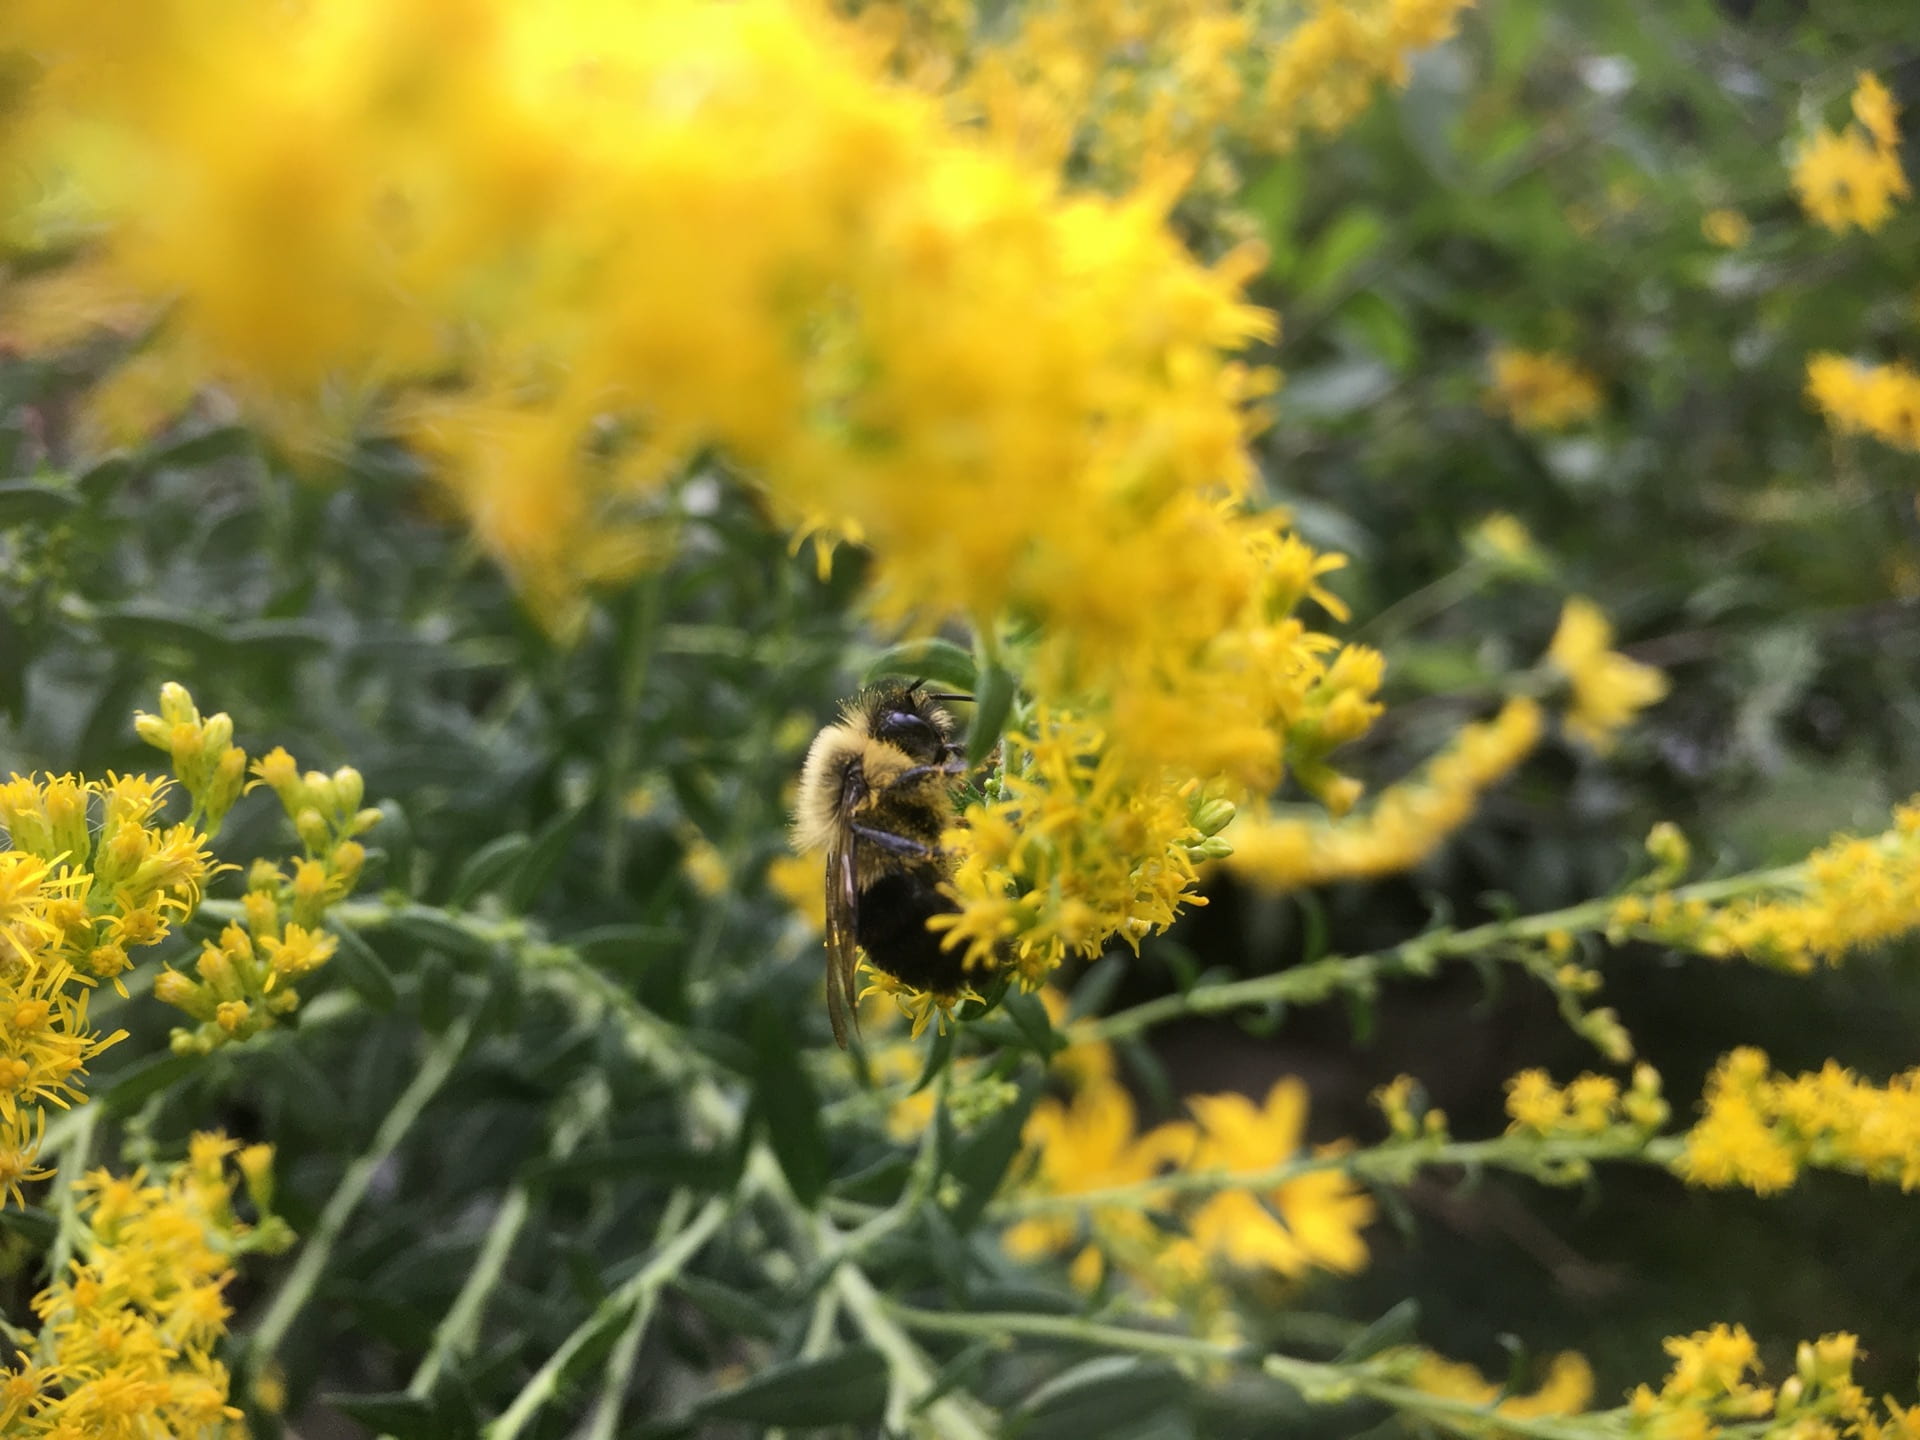 A bumble bee, Bombus spp., visits Solidago flowers.